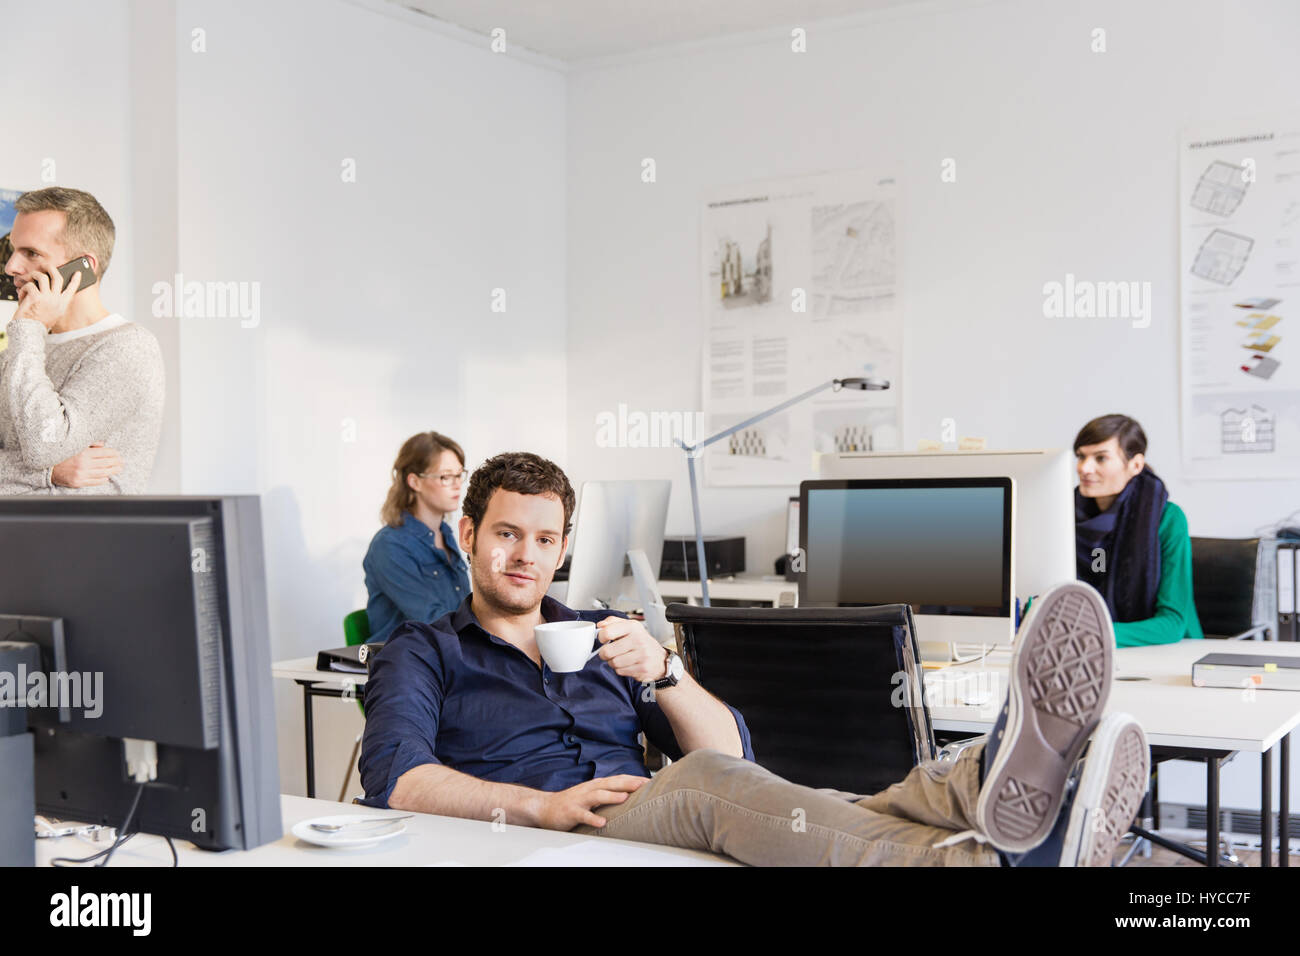 Mid adult man in office, feet on desk holding teacup looking at camera Stock Photo